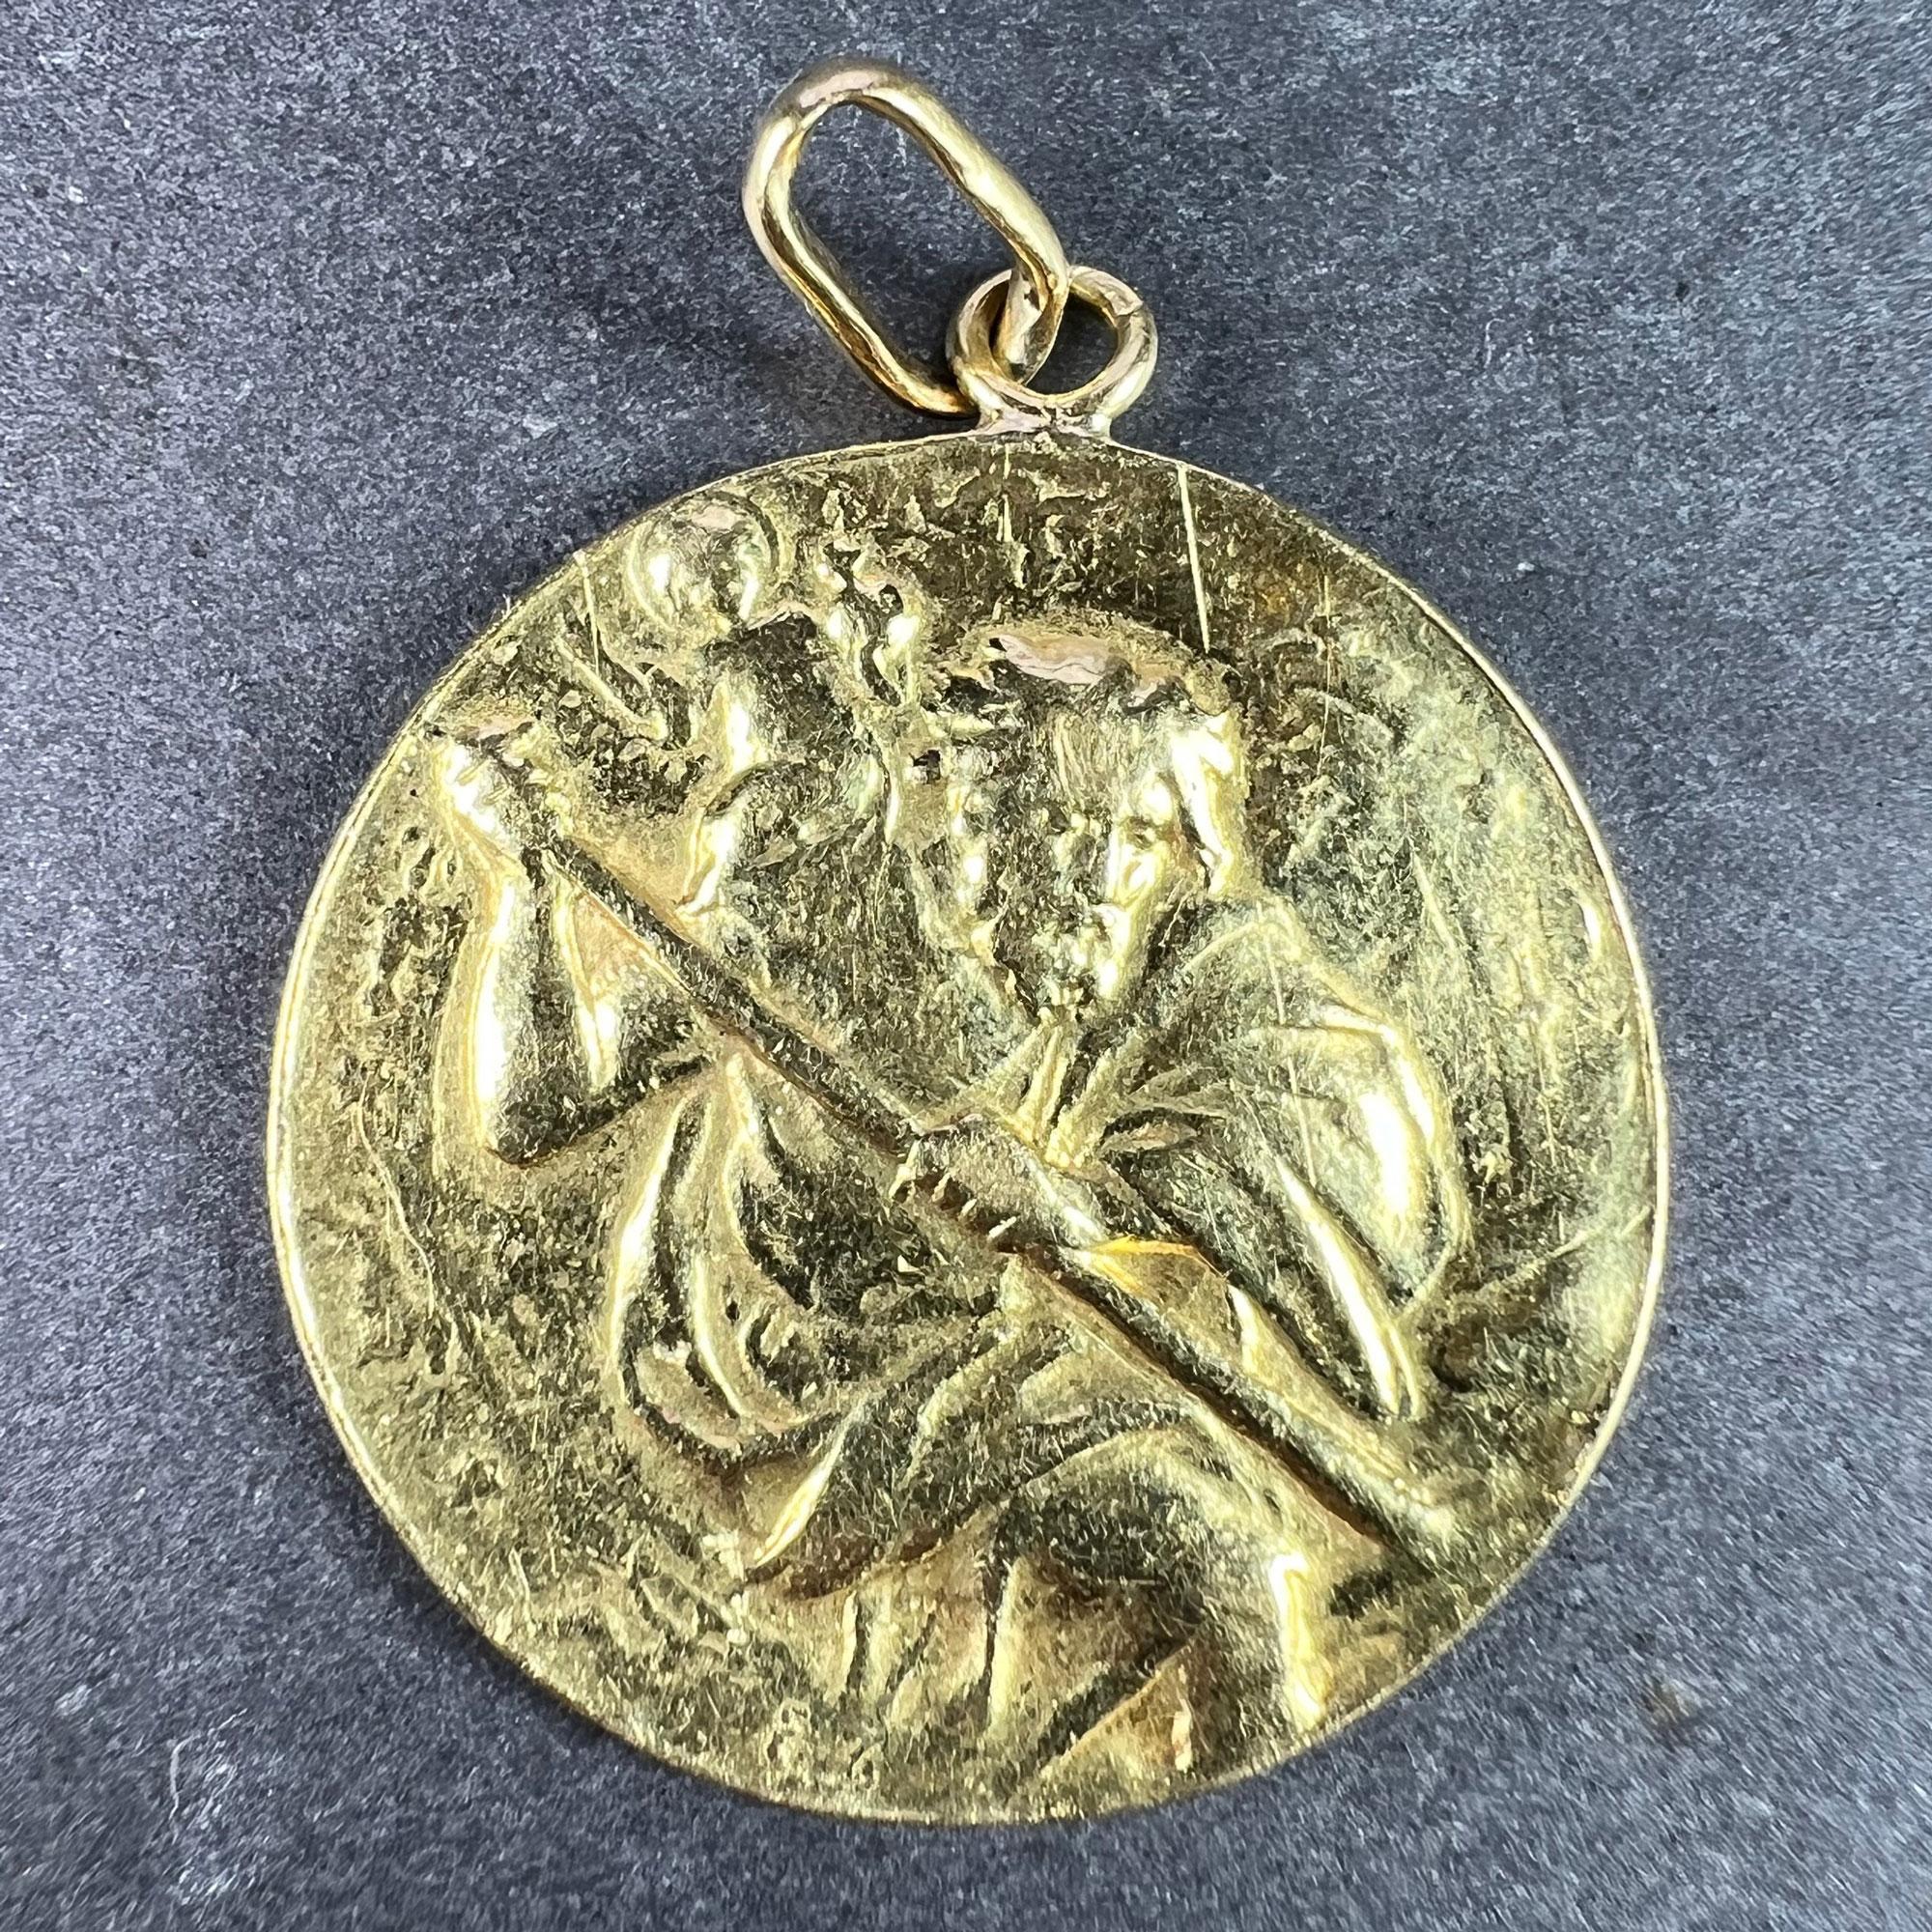 A large 18 karat (18K) yellow gold charm pendant designed as a medal depicting St Christopher as he carries the infant Christ across a river, the reverse with the phrase 'REGARDE ST CHRISTOPHE ET PUIS VA T'EN RASSURE' above a cross with an engraved